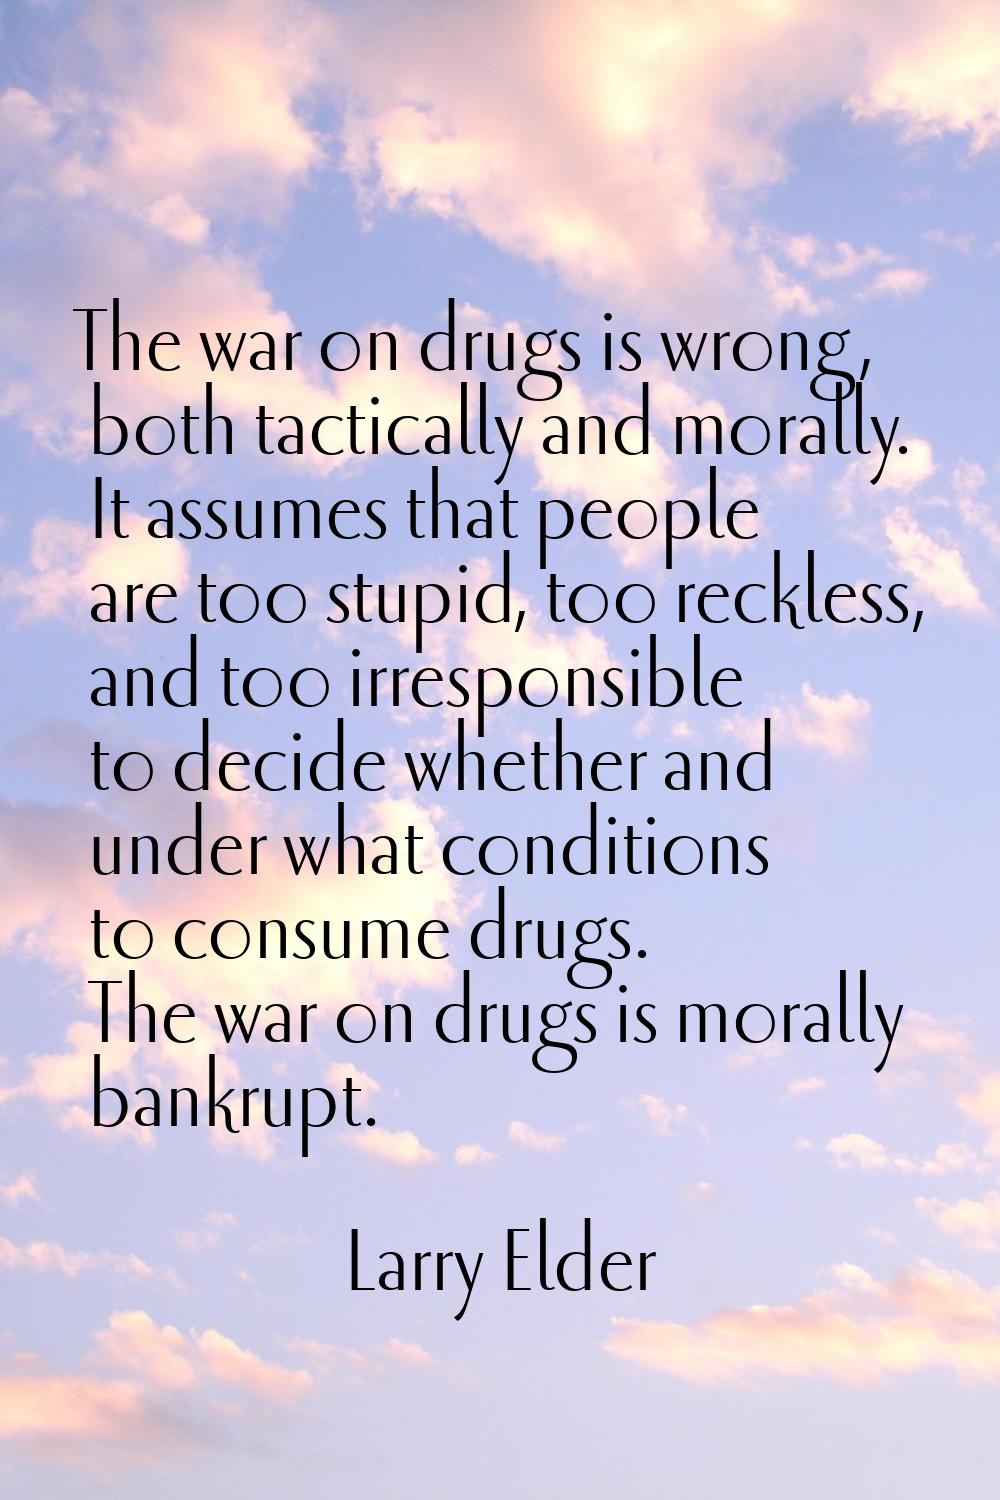 The war on drugs is wrong, both tactically and morally. It assumes that people are too stupid, too 